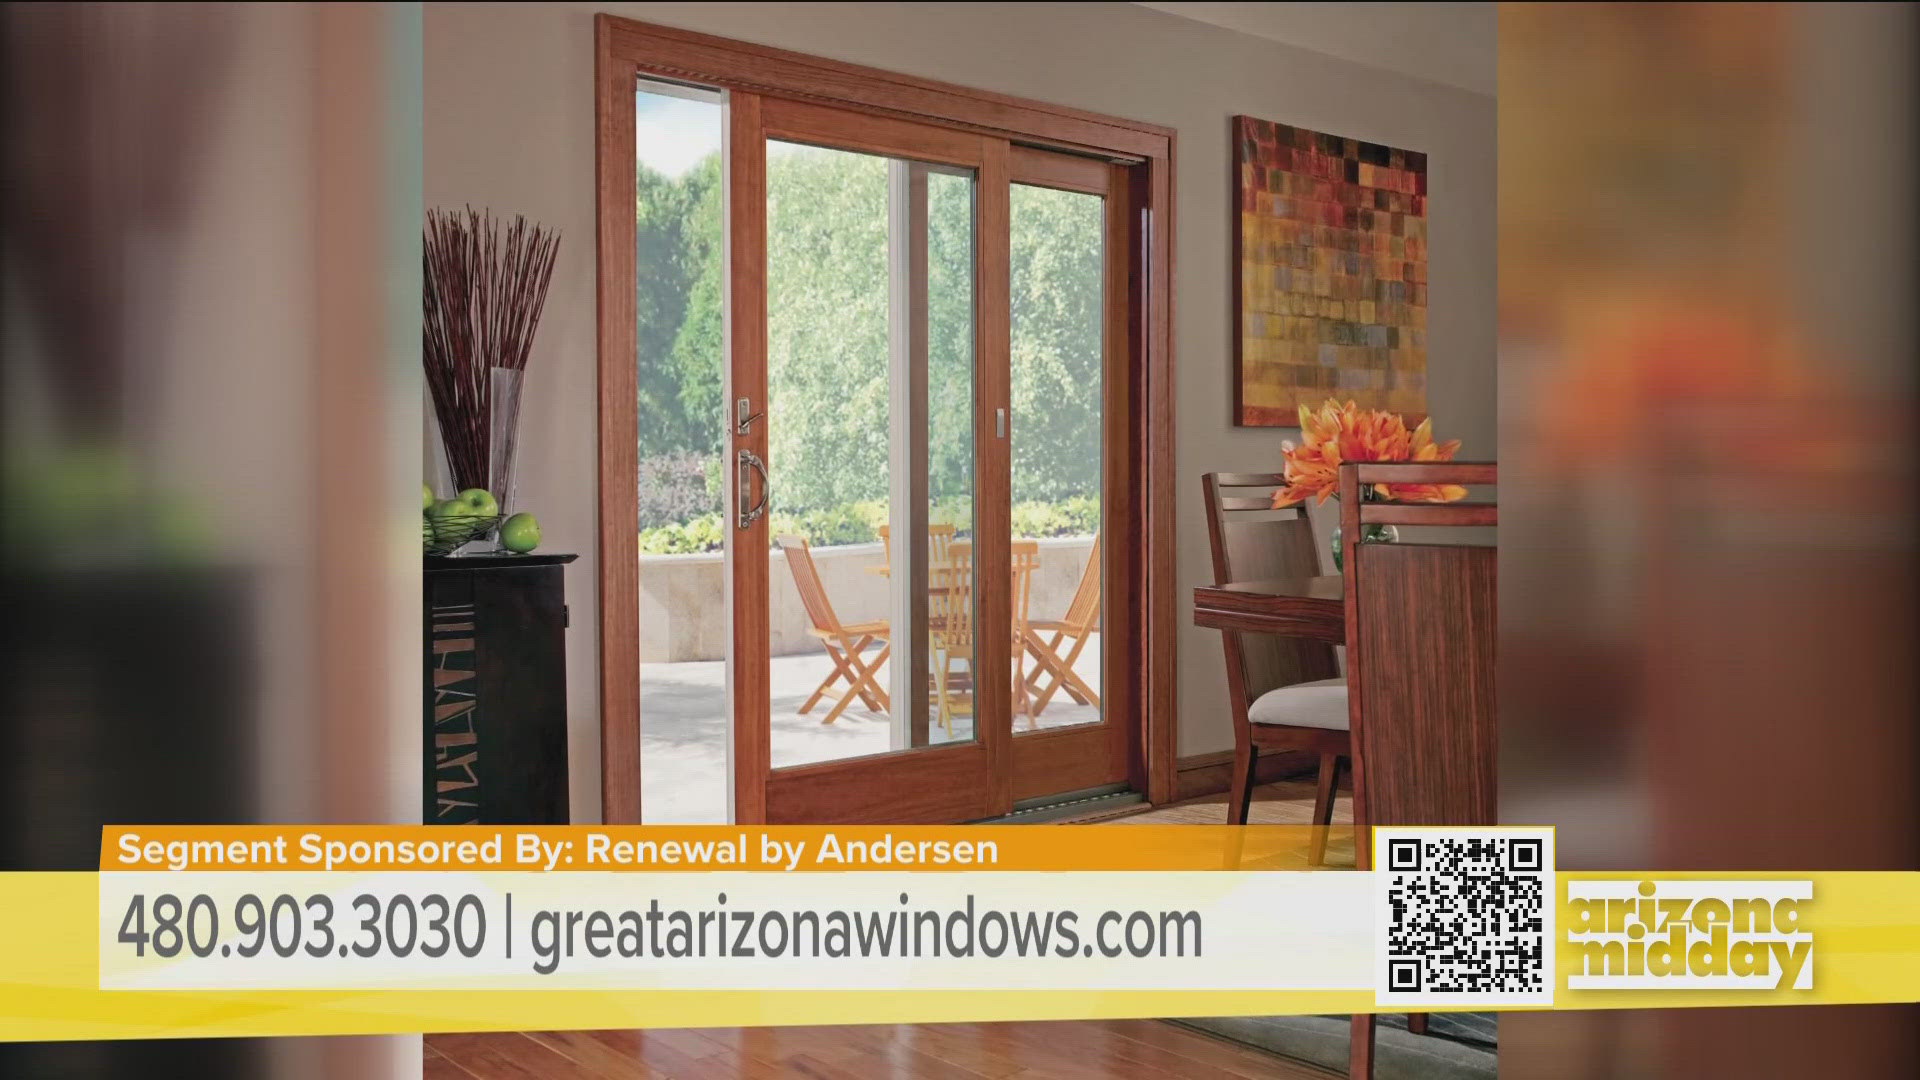 Renewal by Andersen is the full-service replacement window division of Andersen Windows that only installs their own brand windows and with a special for April.